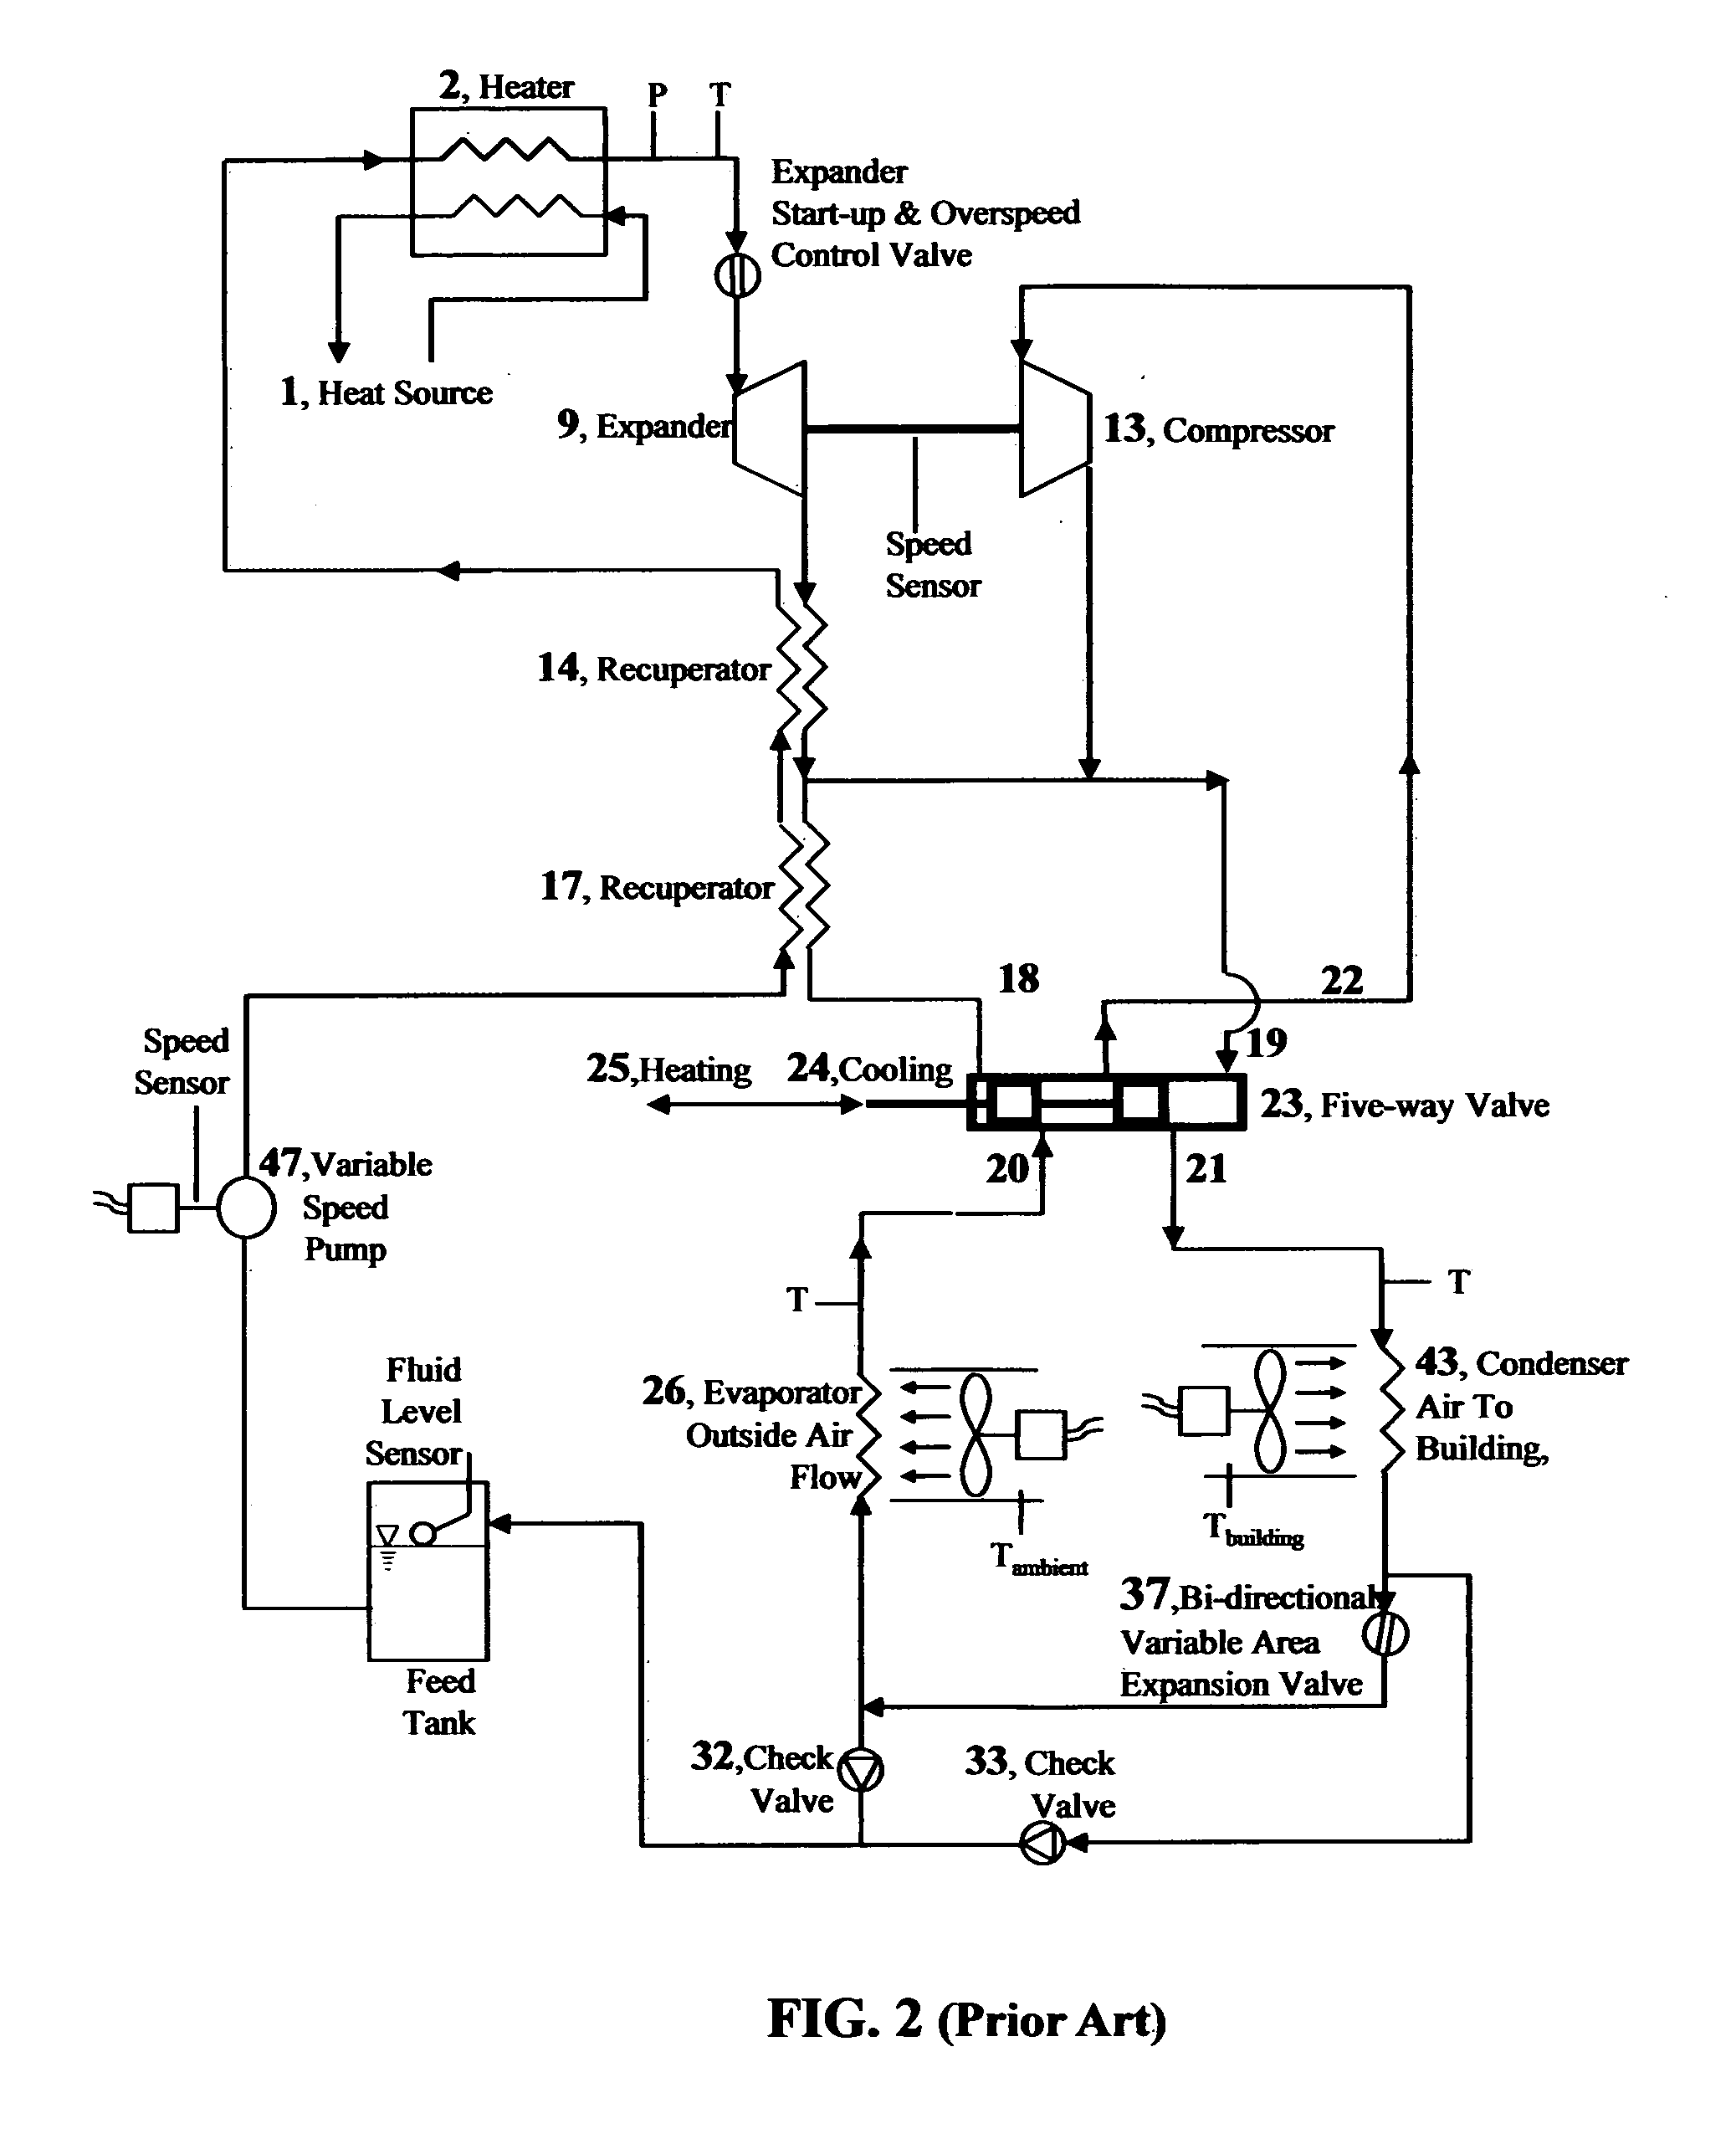 Integrated power, cooling, and heating apparatus utilizing waste heat recovery